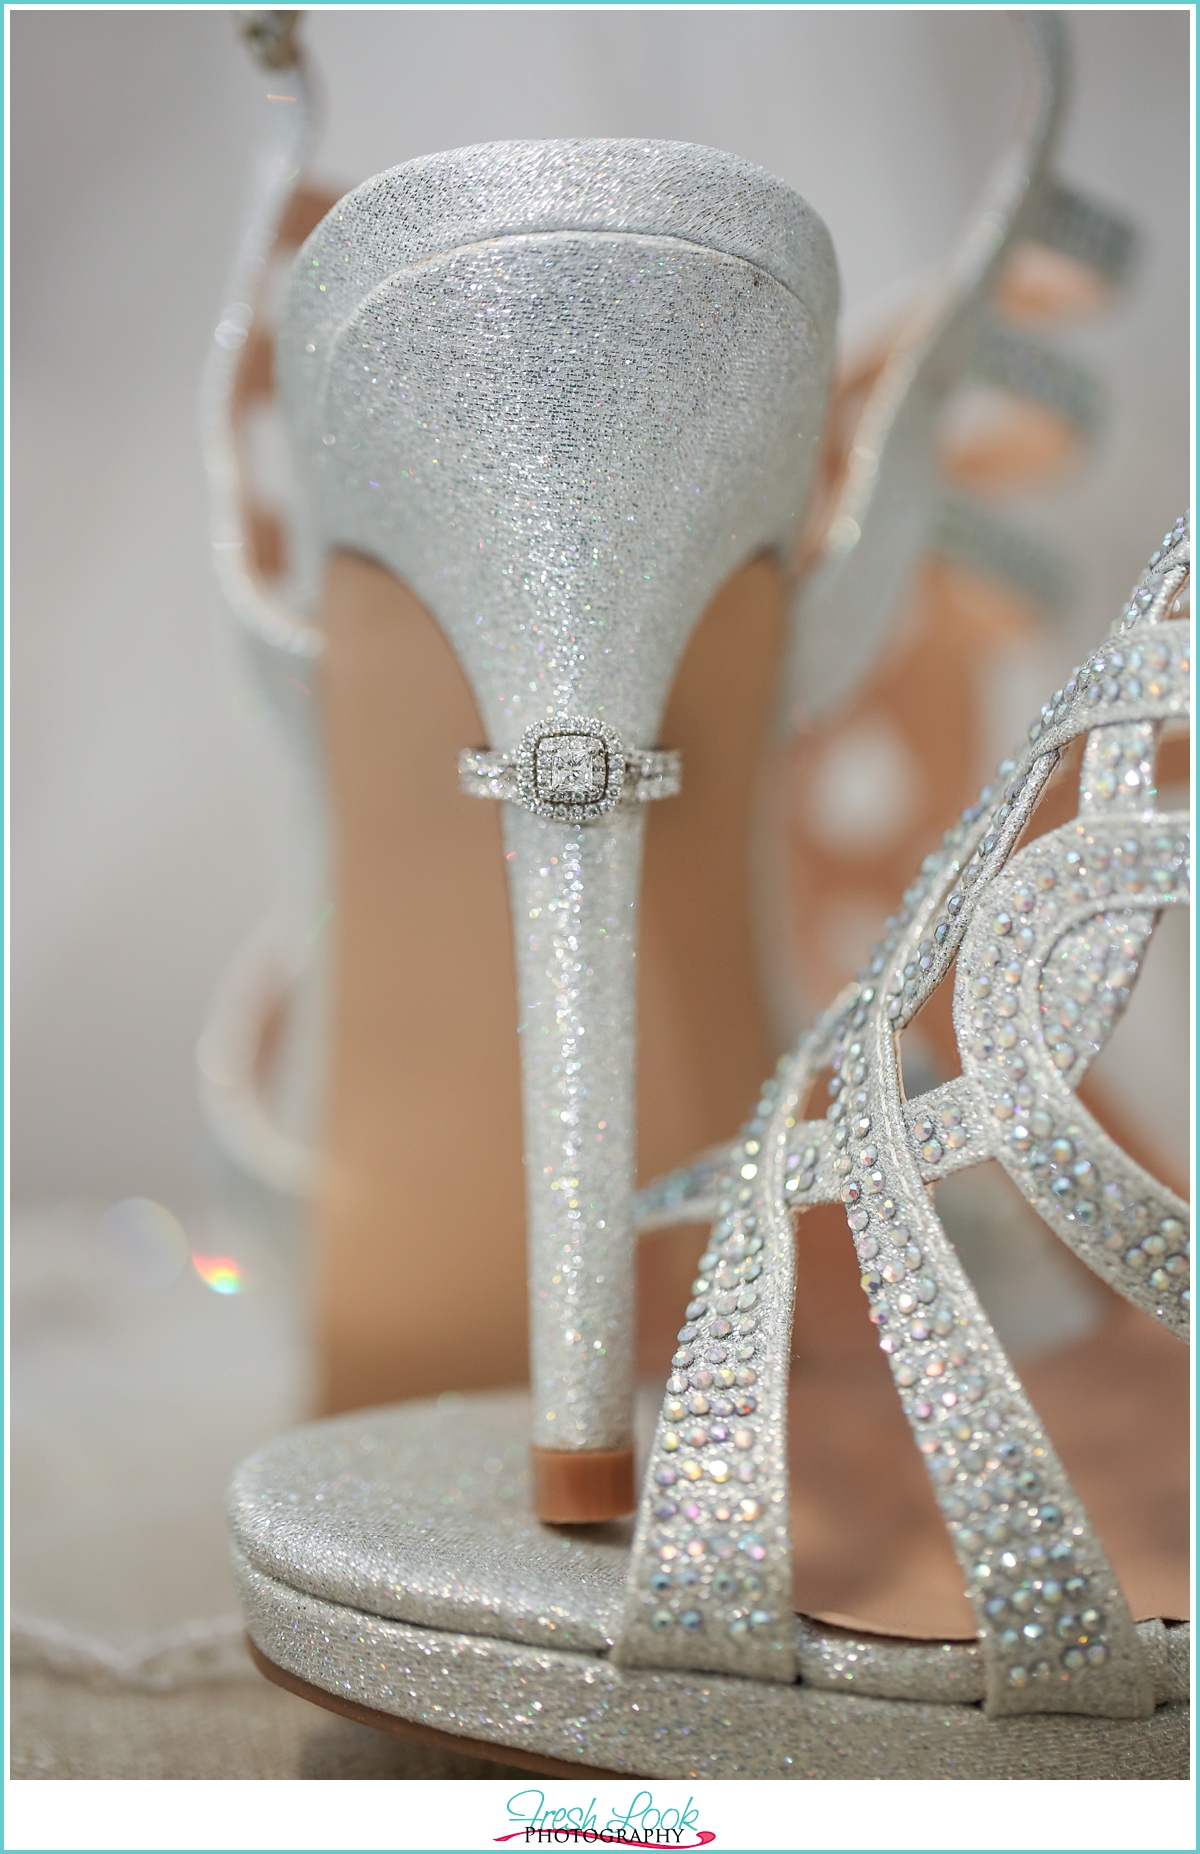 sparkly shoes and engagement ring